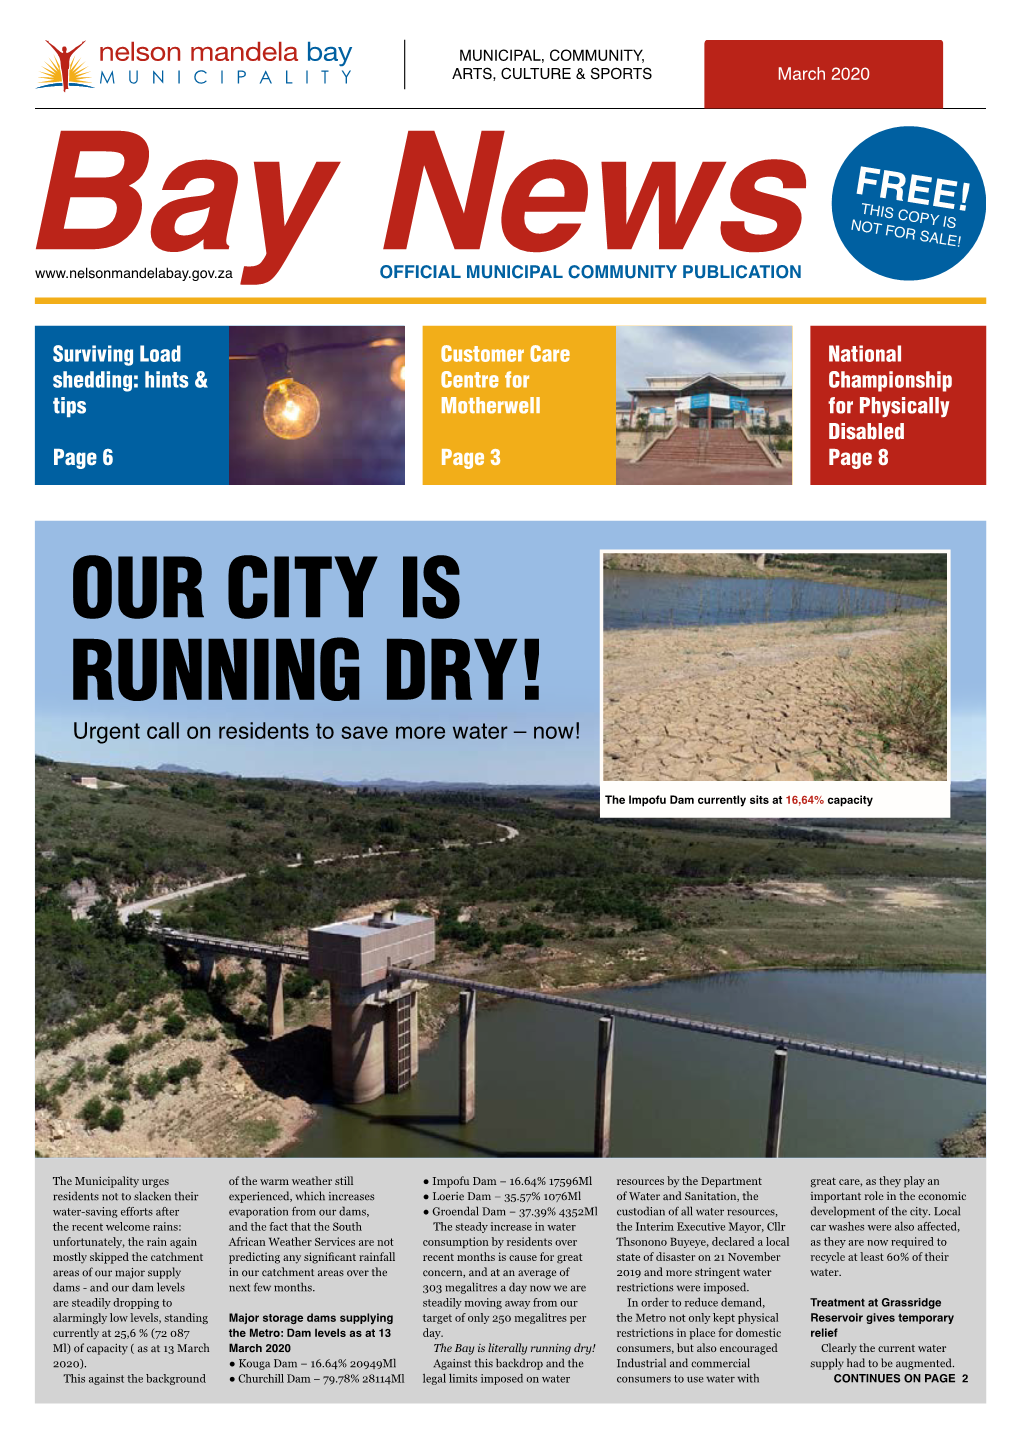 OUR CITY IS RUNNING DRY! Urgent Call on Residents to Save More Water – Now!